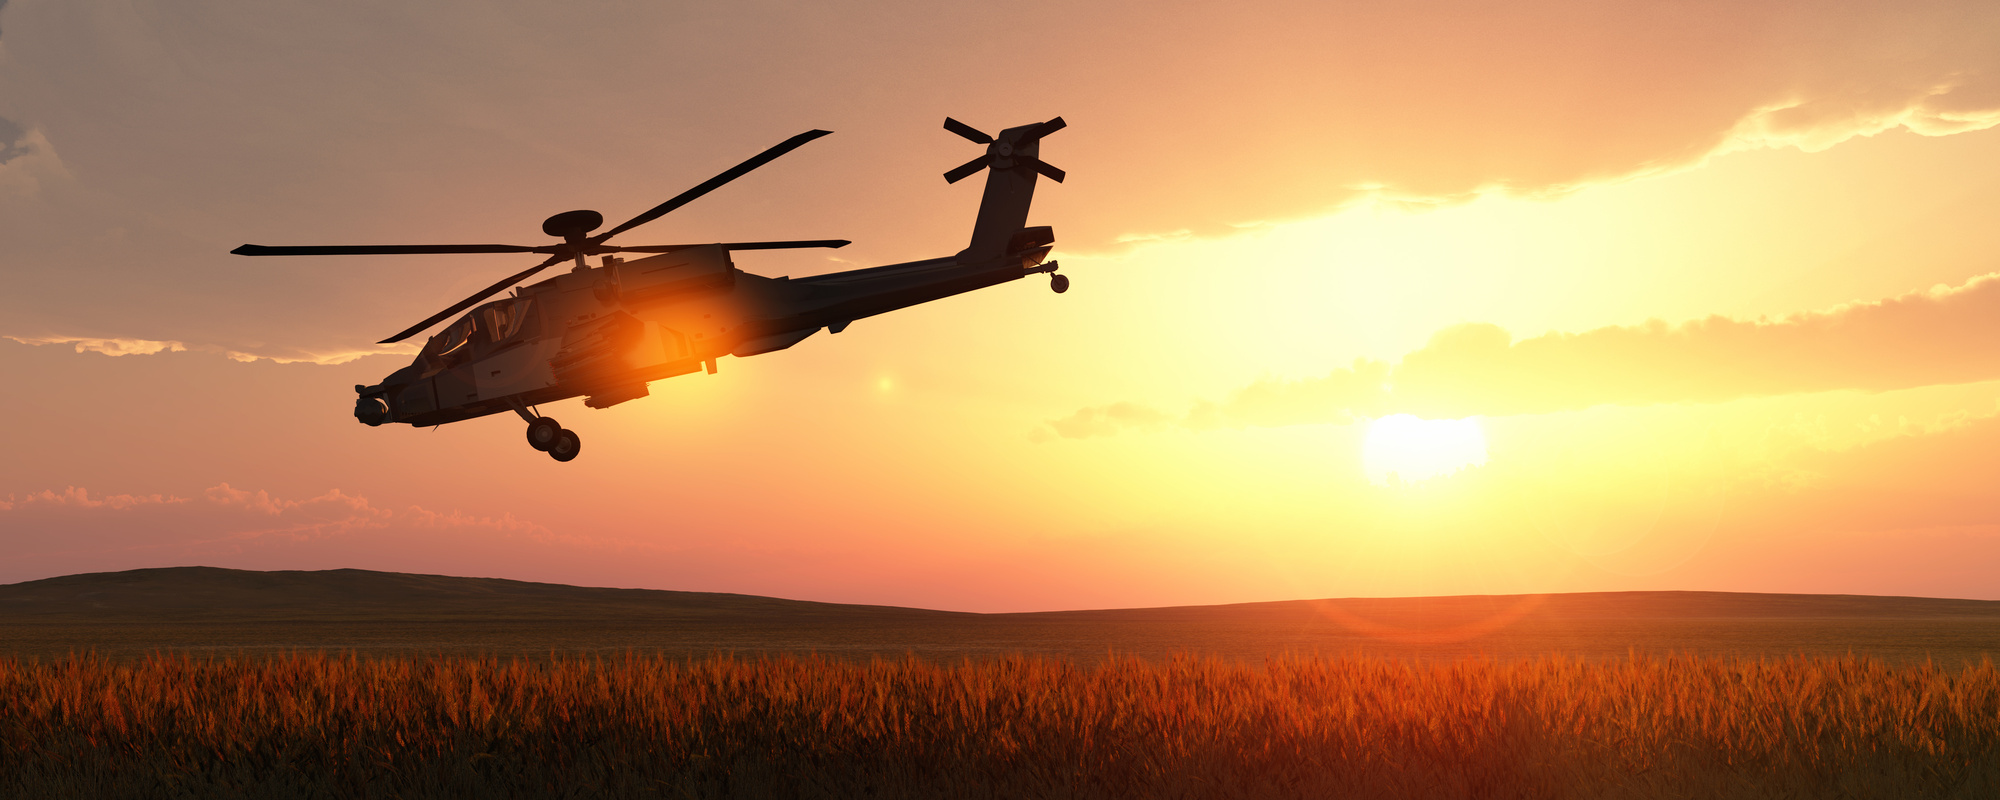 5 Upgrades for Black Hawk Helicopters that Deliver Serious Results